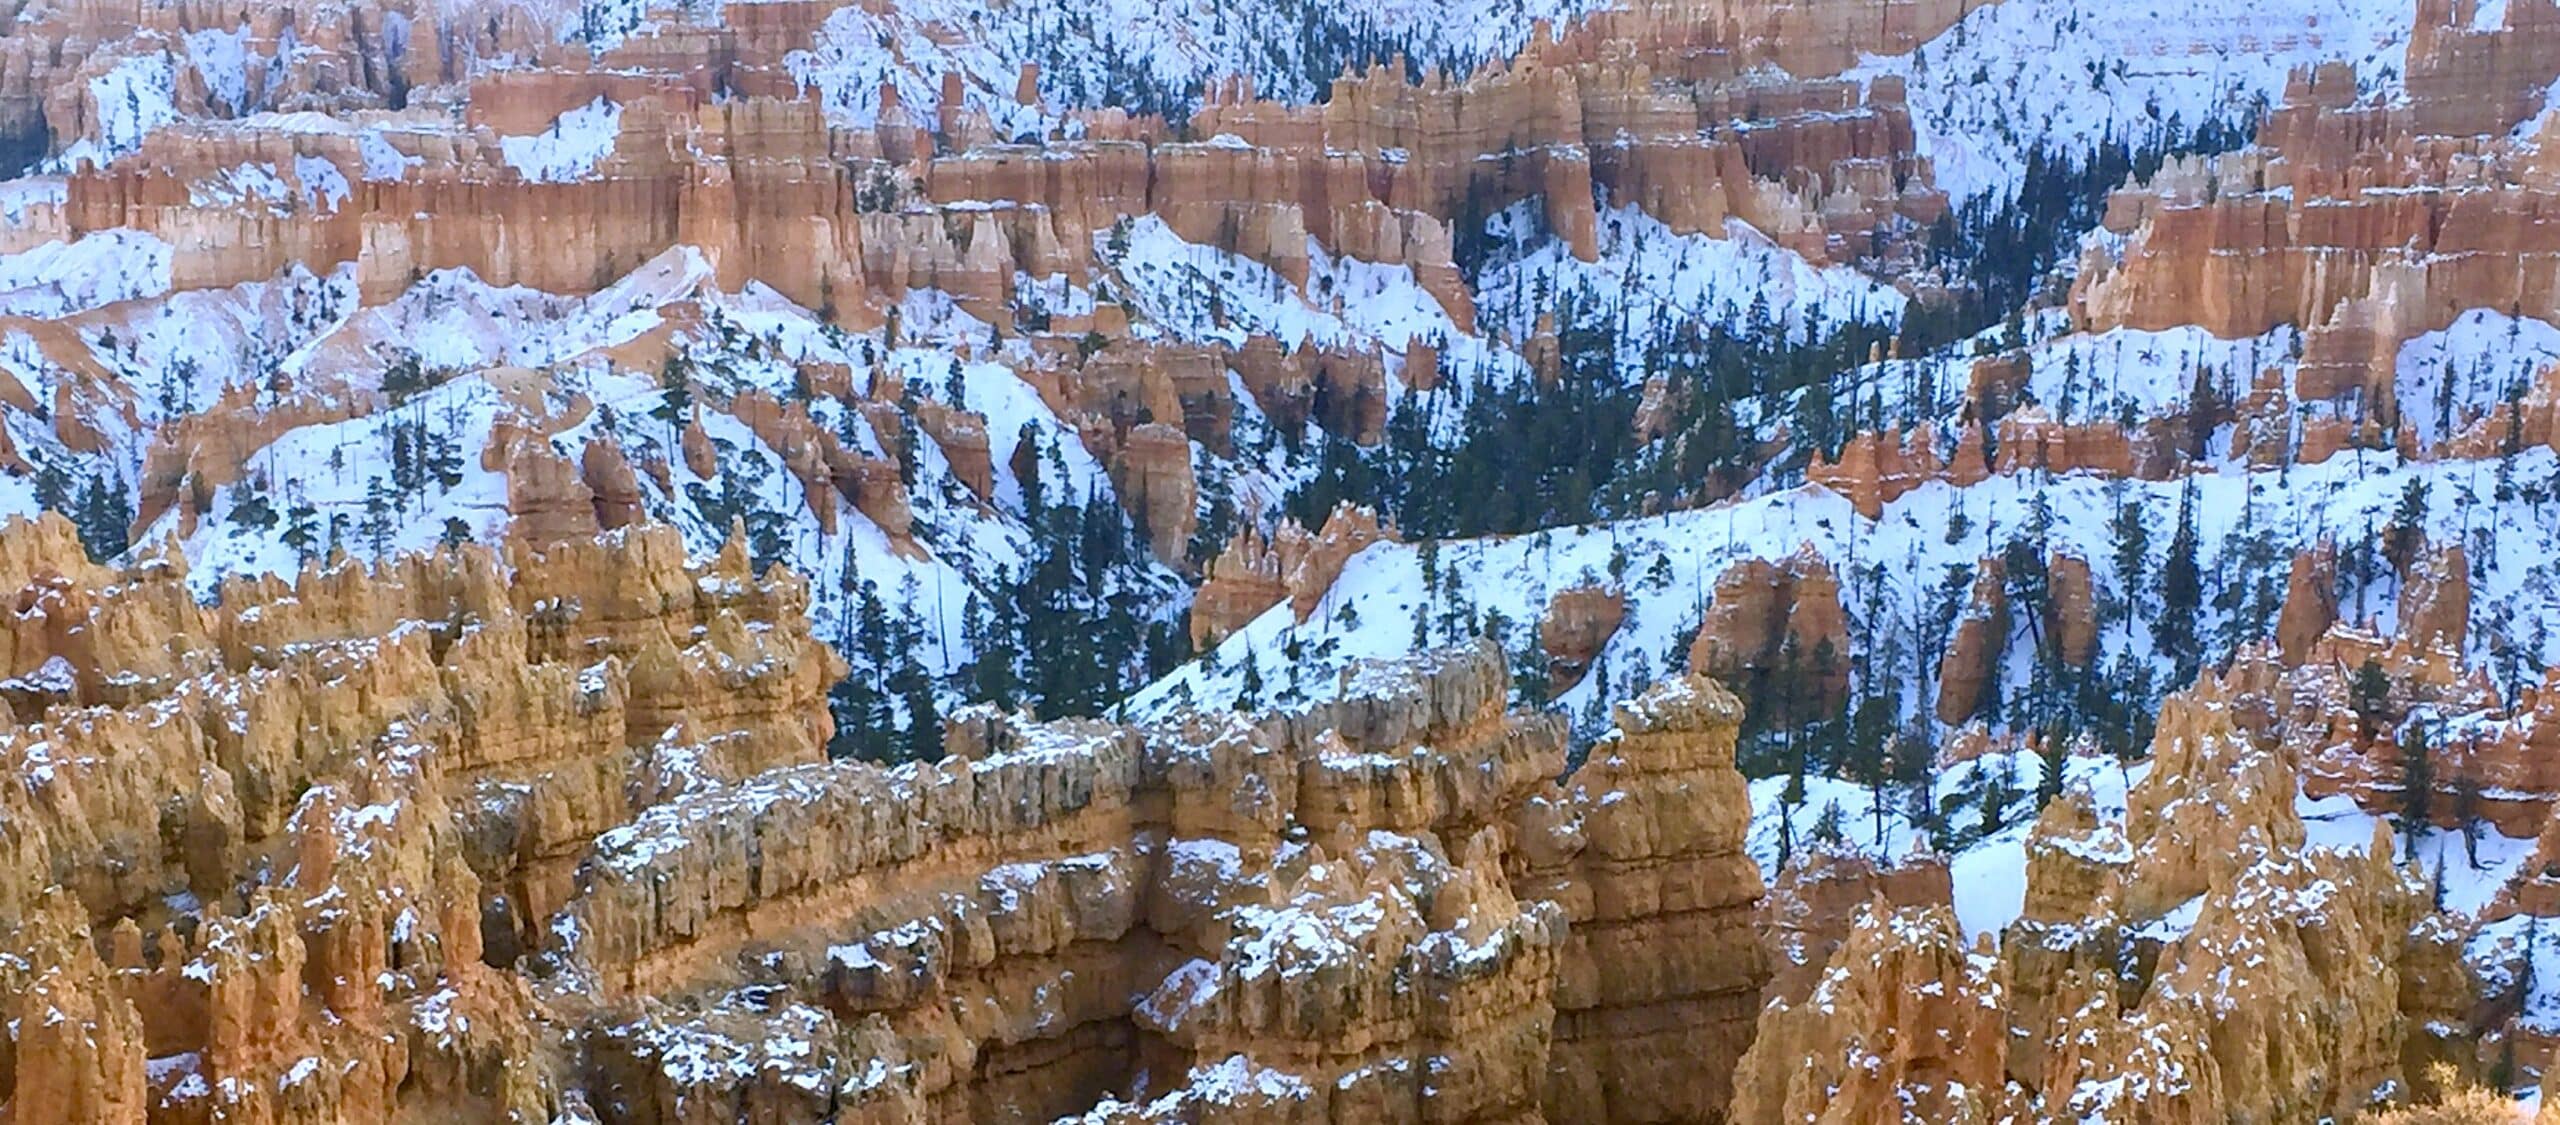 from Bryce Canyon's Towering Technicolor Hoodoos on Slow Down, See More from Bryce Canyon's Towering Technicolor Hoodoos on Slow Down, See More from Bryce Canyon's Towering Technicolor Hoodoos on Slow Down, See More from Bryce Canyon's Towering Technicolor Hoodoos on Slow Down, See More from Bryce Canyon's Towering Technicolor Hoodoos on Slow Down, See More from Bryce Canyon's Towering Technicolor Hoodoos on Slow Down, See More from Bryce Canyon's Towering Technicolor Hoodoos on Slow Down, See More from Bryce Canyon's Towering Technicolor Hoodoos on Slow Down, See More from Bryce Canyon's Towering Technicolor Hoodoos on Slow Down, See More from Bryce Canyon's Towering Technicolor Hoodoos on Slow Down, See More from Bryce Canyon's Towering Technicolor Hoodoos on Slow Down, See More from Bryce Canyon's Towering Technicolor Hoodoos on Slow Down, See More from Bryce Canyon's Towering Technicolor Hoodoos on Slow Down, See More from Bryce Canyon's Towering Technicolor Hoodoos on Slow Down, See More from Bryce Canyon's Towering Technicolor Hoodoos on Slow Down, See More from Bryce Canyon's Towering Technicolor Hoodoos on Slow Down, See More from Bryce Canyon's Towering Technicolor Hoodoos on Slow Down, See More from Bryce Canyon's Towering Technicolor Hoodoos on Slow Down, See More from Bryce Canyon's Towering Technicolor Hoodoos on Slow Down, See More from Bryce Canyon's Towering Technicolor Hoodoos on Slow Down, See More from Bryce Canyon's Towering Technicolor Hoodoos on Slow Down, See More from Bryce Canyon's Towering Technicolor Hoodoos on Slow Down, See More from Bryce Canyon's Towering Technicolor Hoodoos on Slow Down, See More from Bryce Canyon's Towering Technicolor Hoodoos on Slow Down, See More